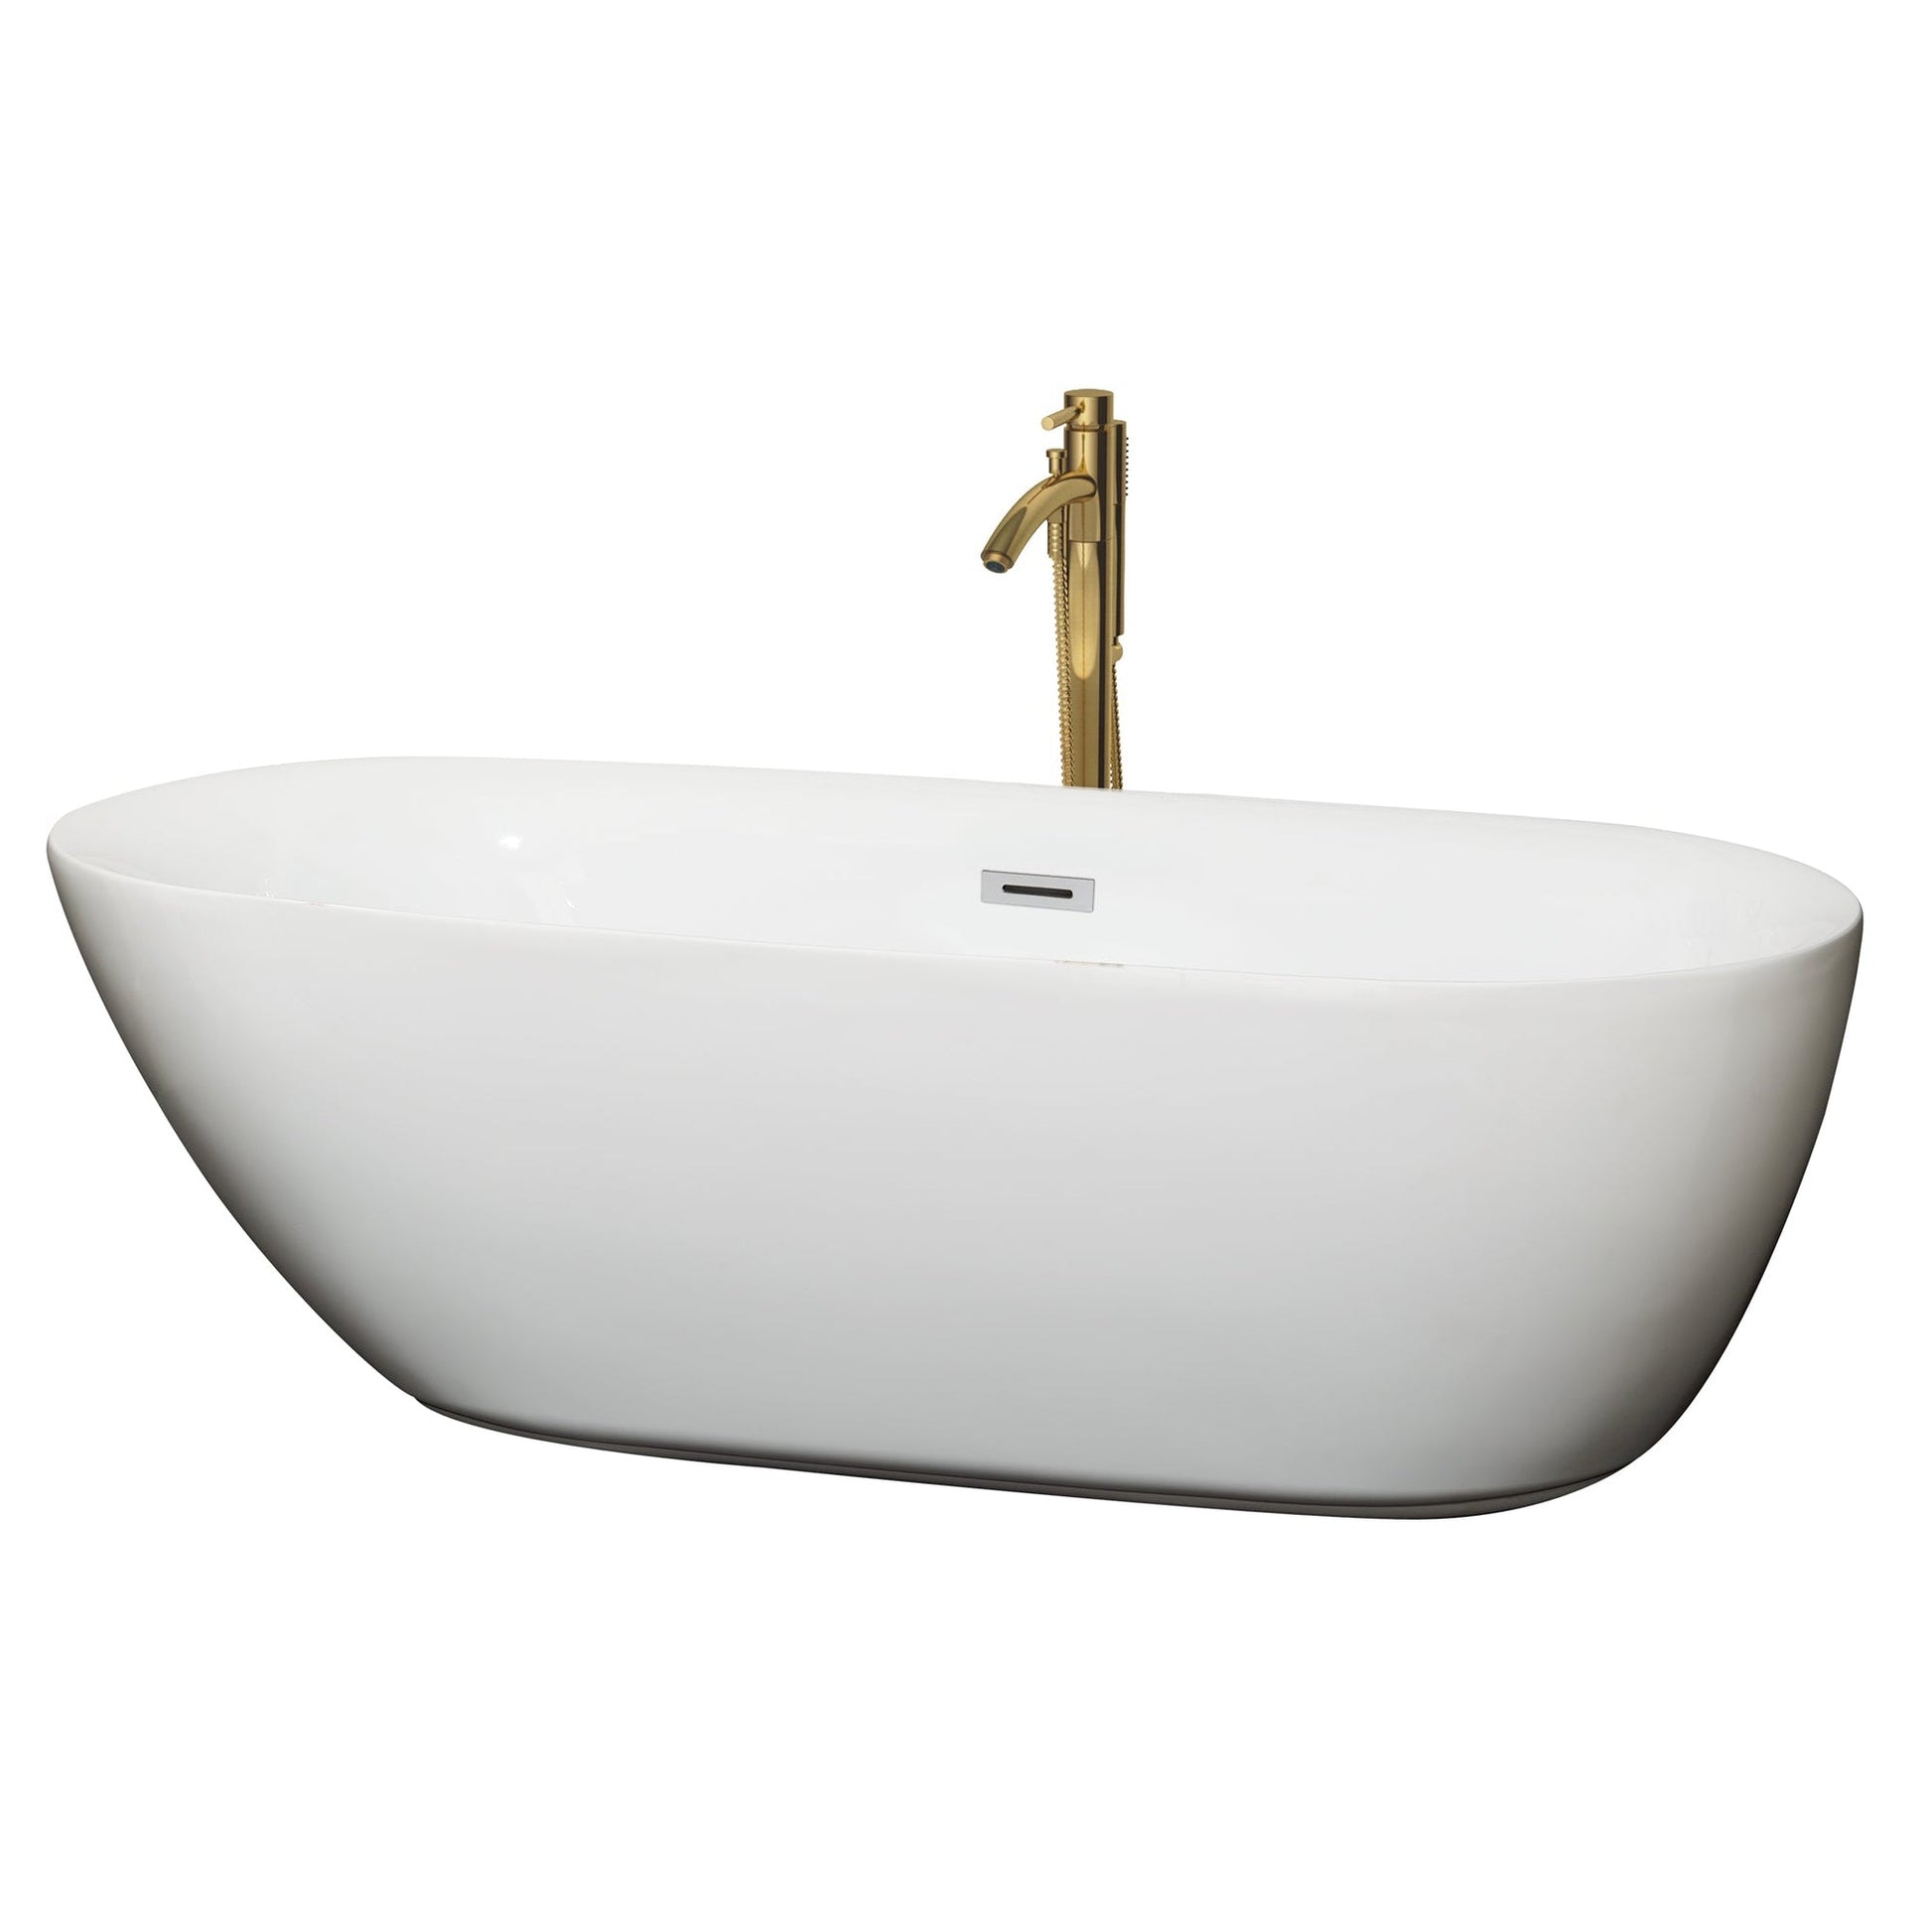 Wyndham Collection Melissa 71" Freestanding Bathtub in White With Polished Chrome Trim and Floor Mounted Faucet in Brushed Gold